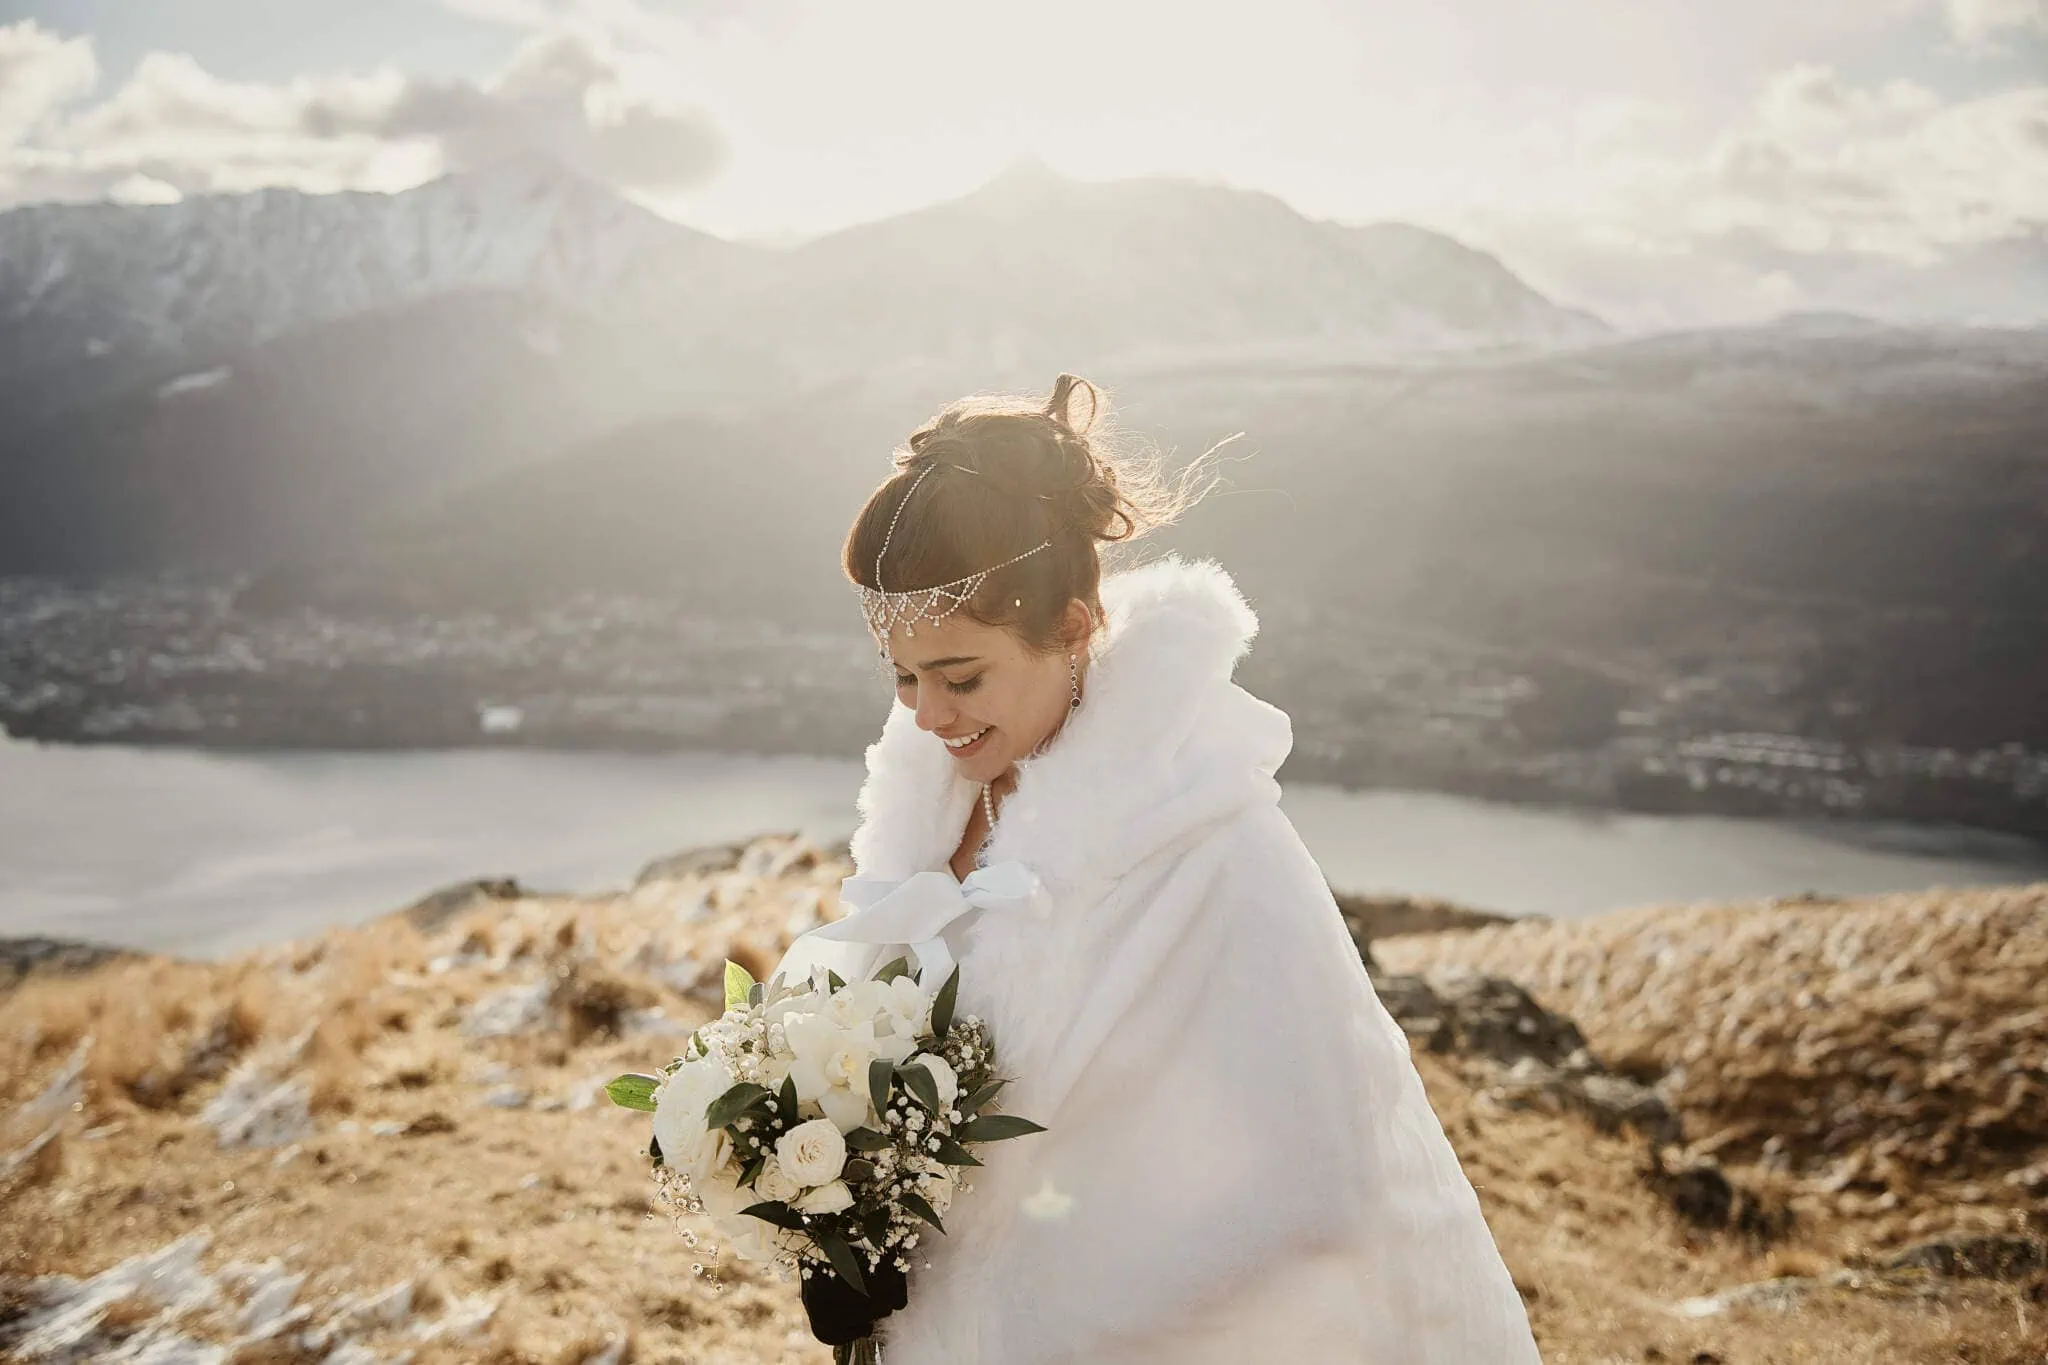 Queenstown New Zealand Elopement Wedding Photographer - A bride wearing a white cloak standing on top of a hill overlooking Lake Wanaka during the Queenstown Islamic wedding of Wasim and Yumn.